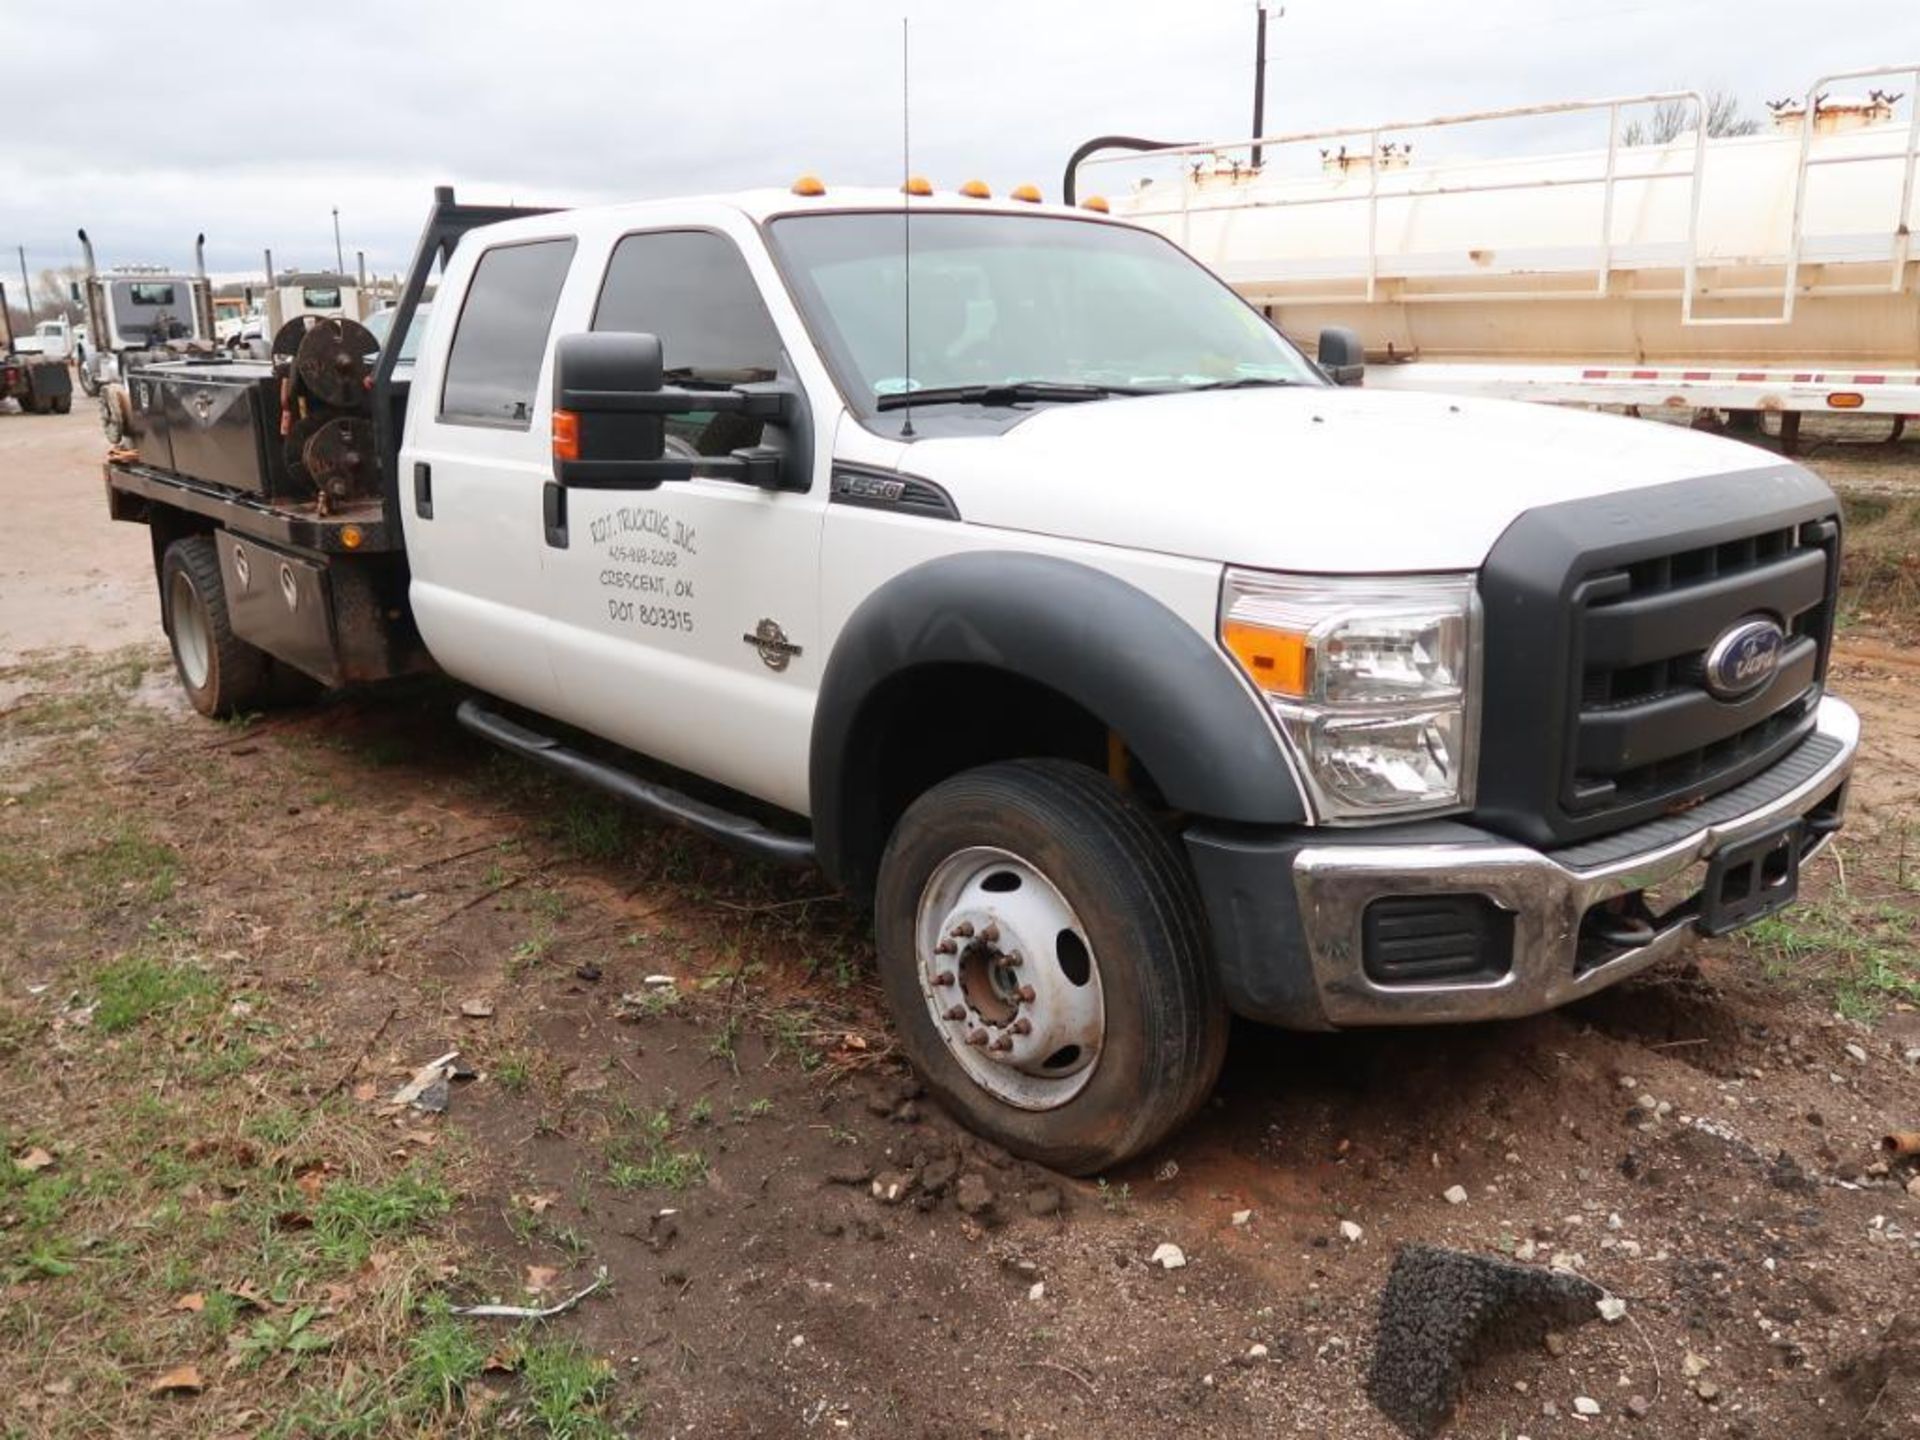 2015 Ford Model F-550, 4-Door Crew Cab Roustabout Truck, 6. 7L V8 Diesel, w/ Bed and Boxes, Pipe Thr - Image 2 of 10